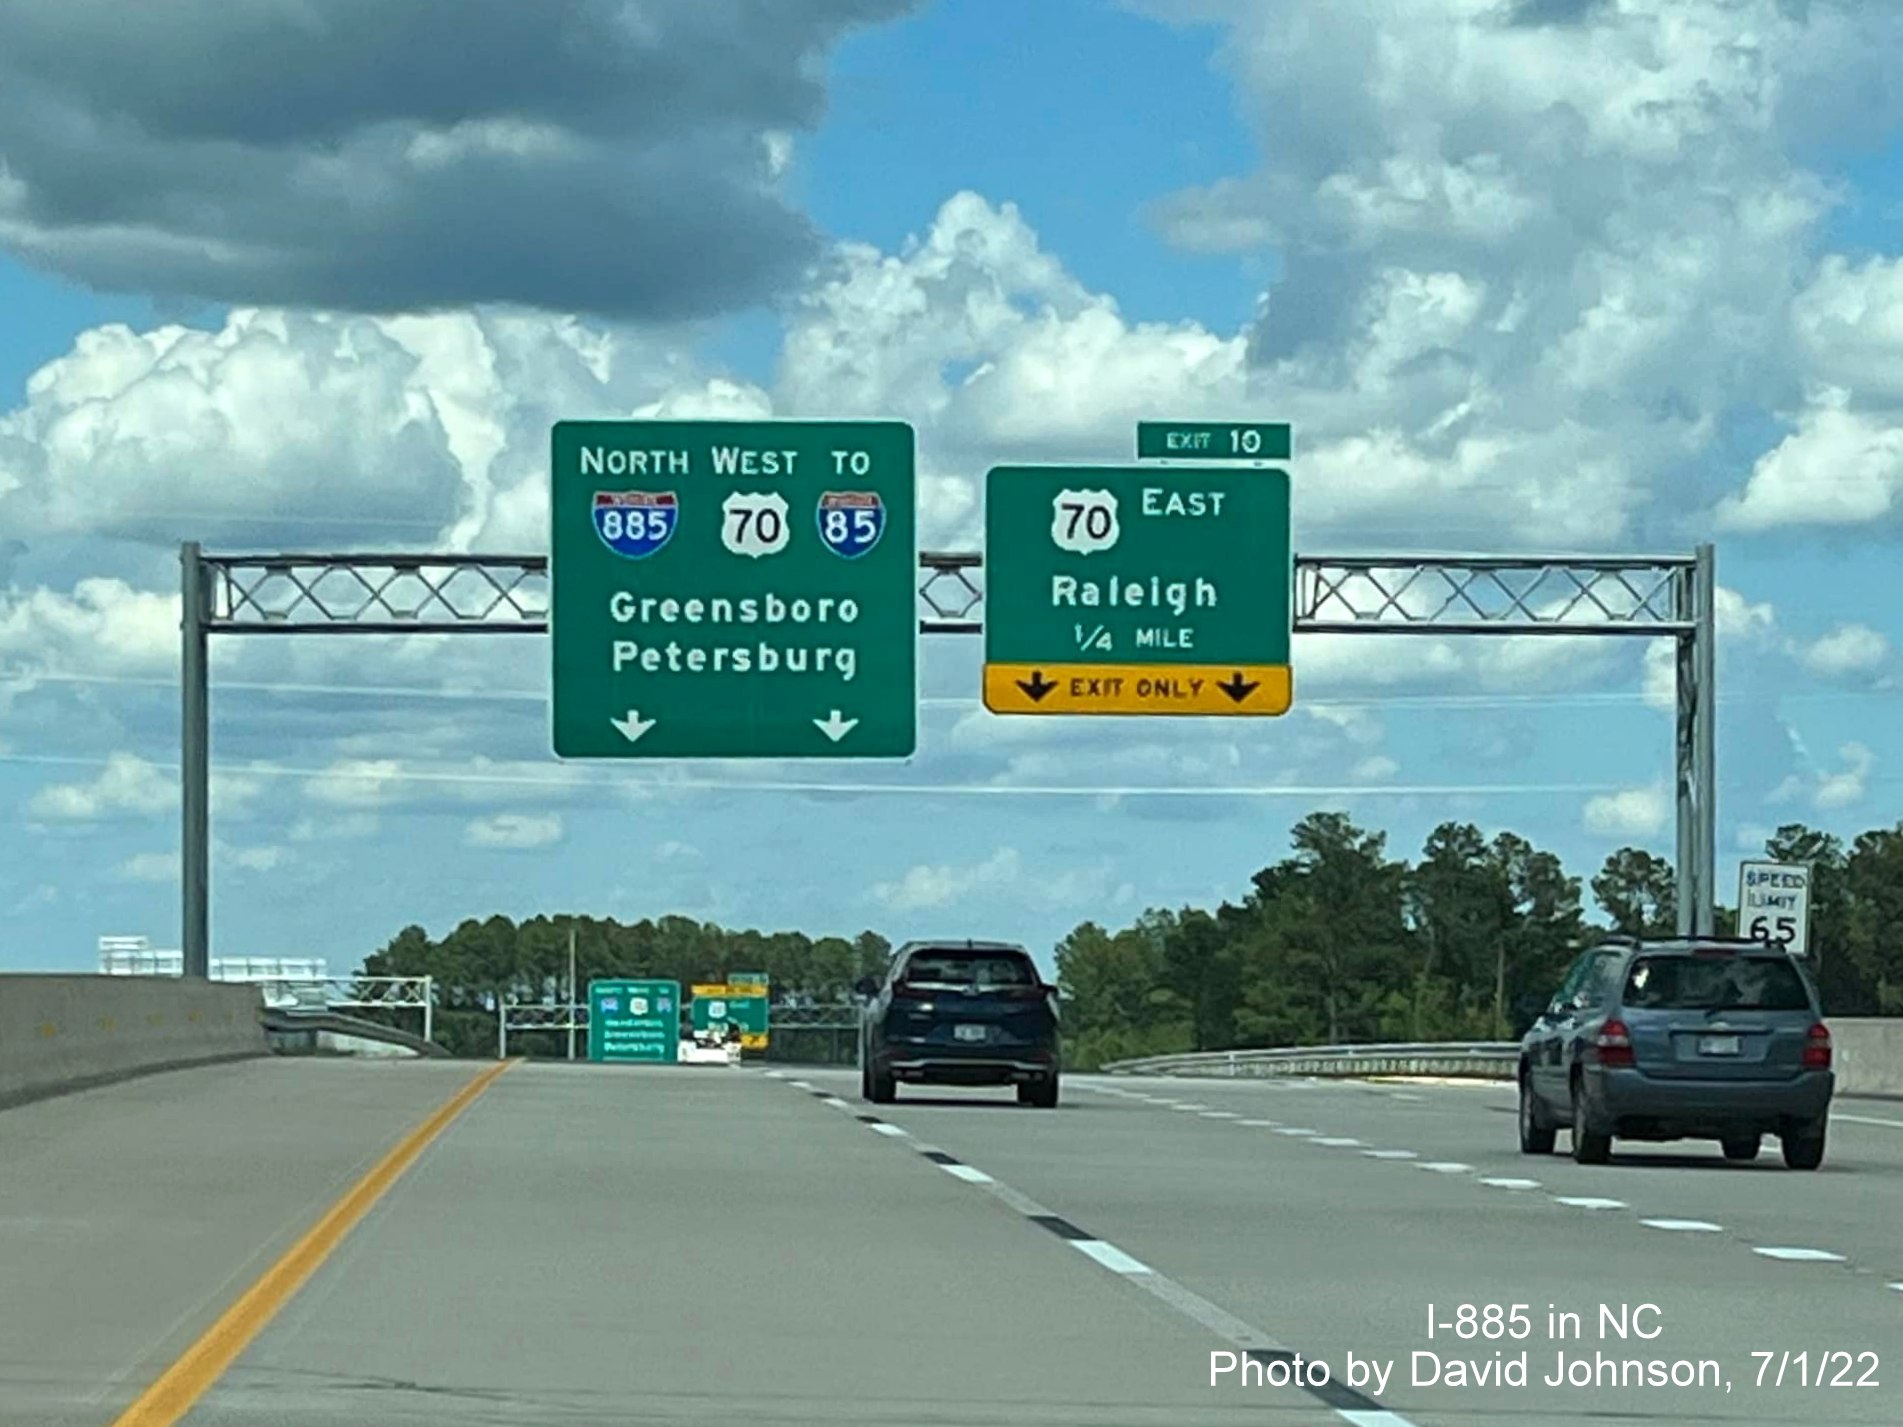 Image of overhead signage on I-885 North/East End Connector ramp approaching US 70 East exit, by David Johnson July 2022